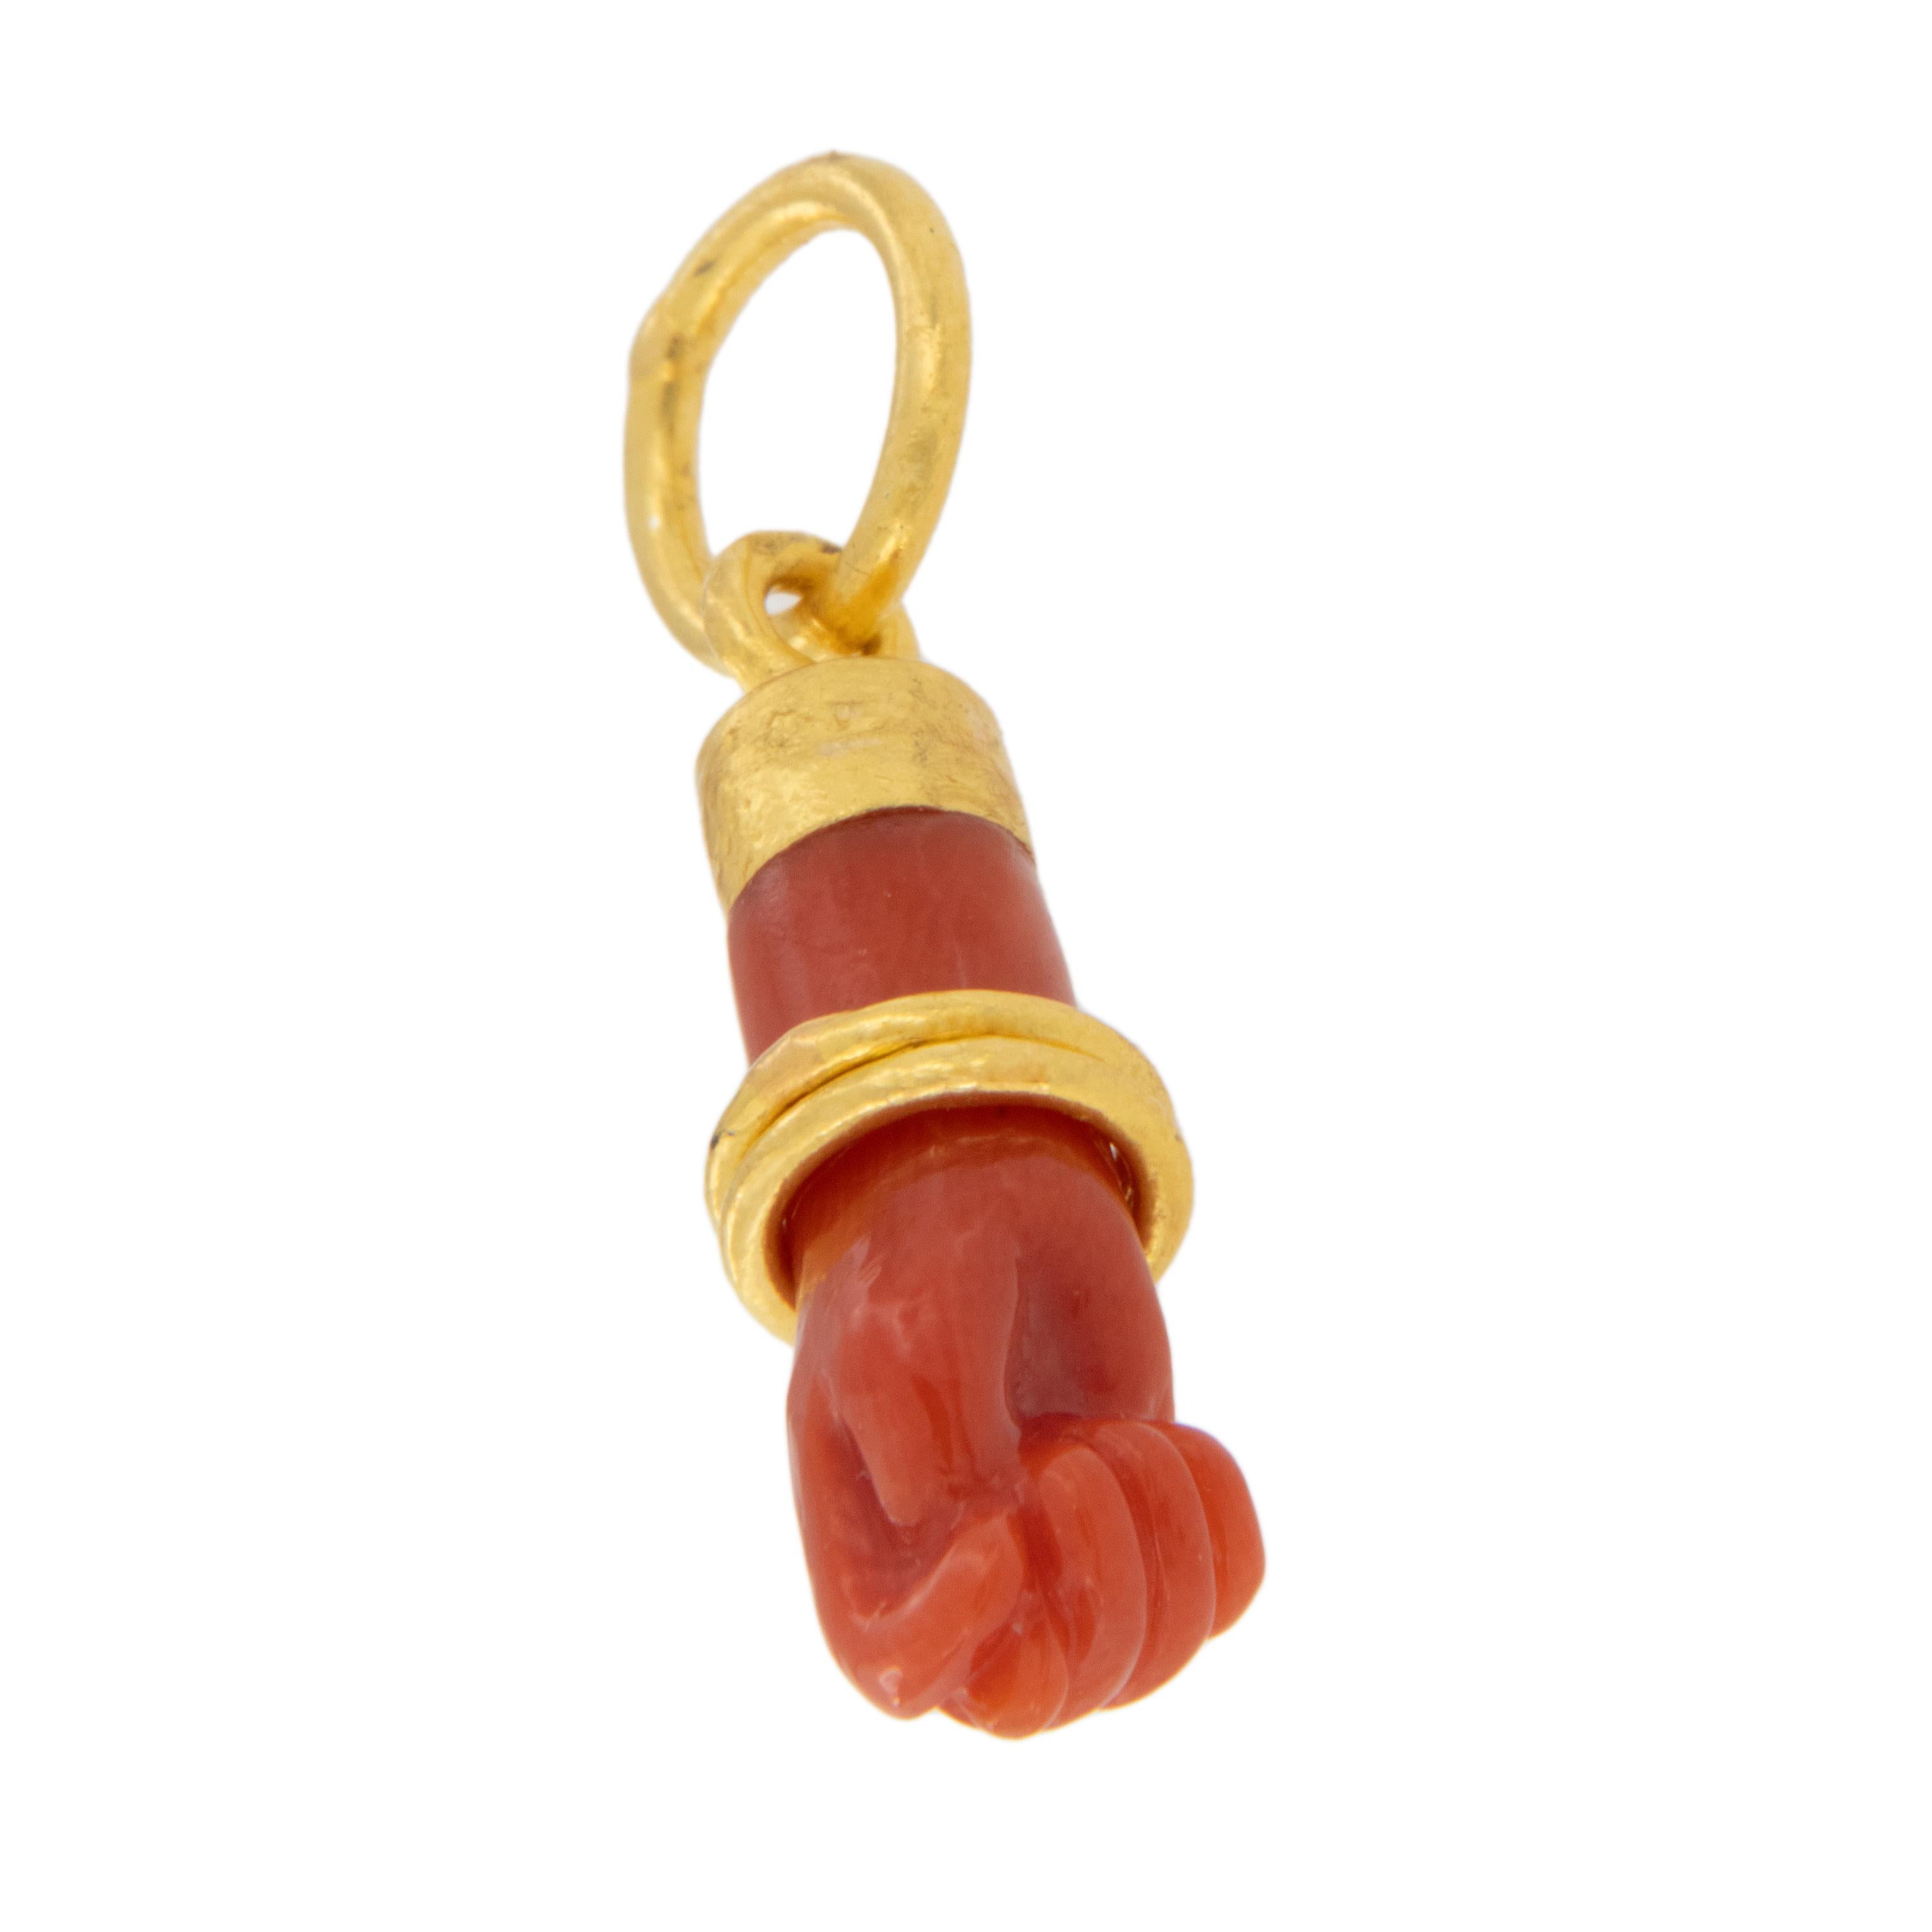 Hand carved from beautiful Mediterranean coral, this figa pendant is accented with a pure 24 karat yellow gold 